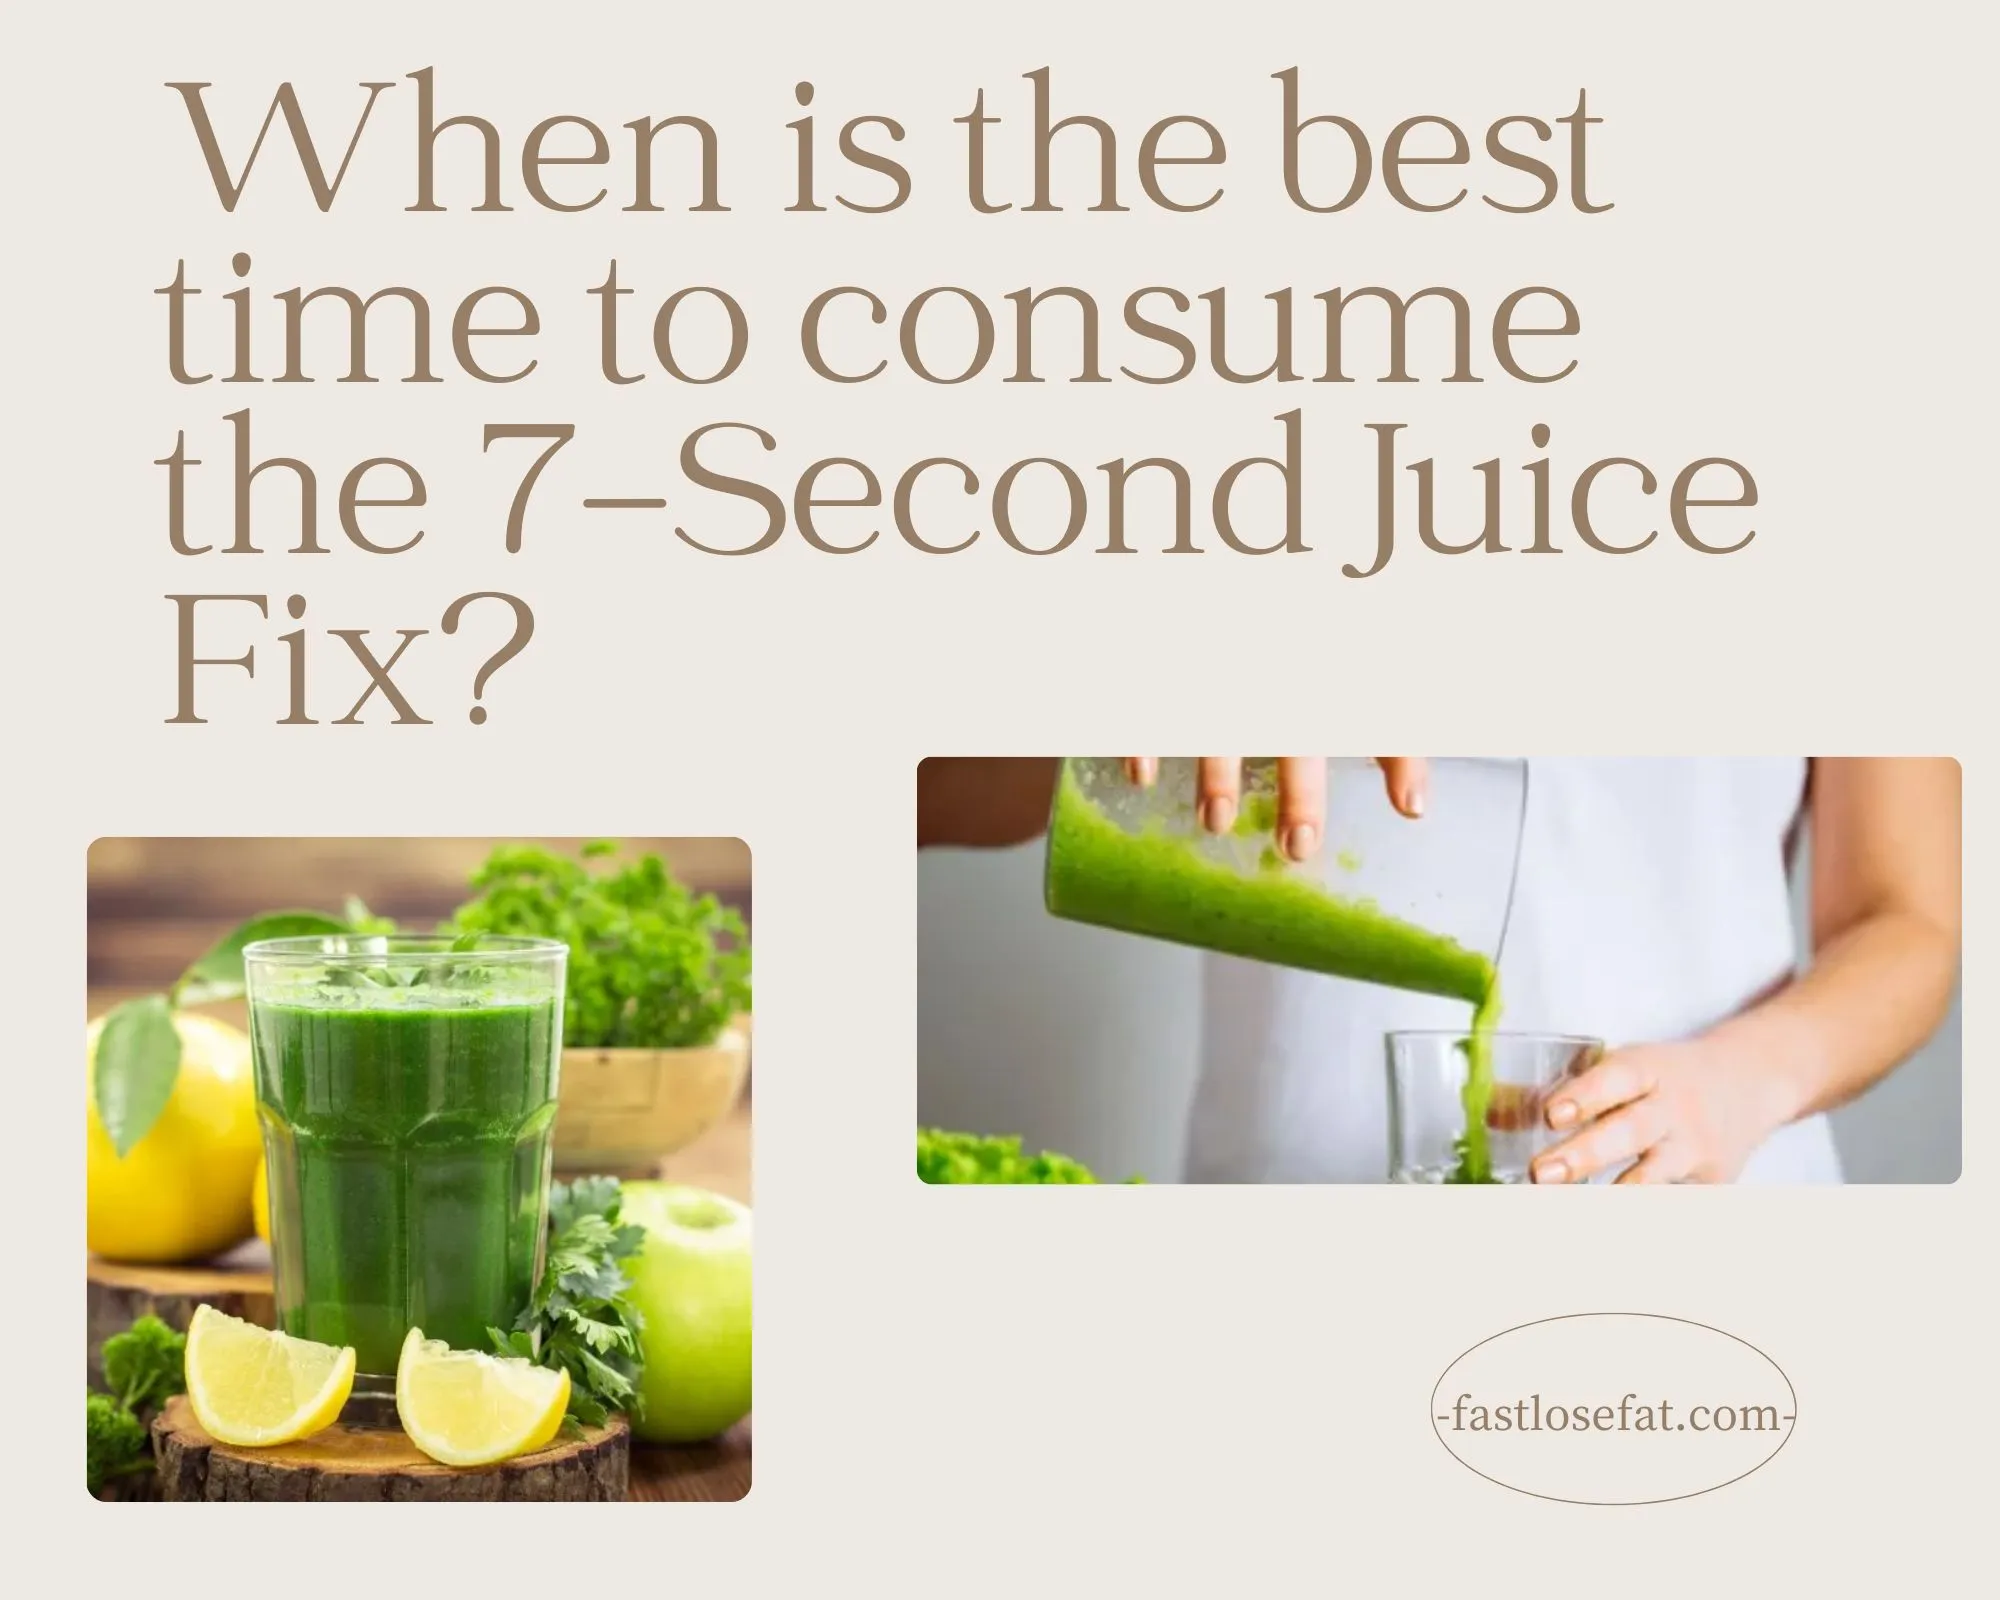 When is the best time to consume the 7-Second Juice Fix